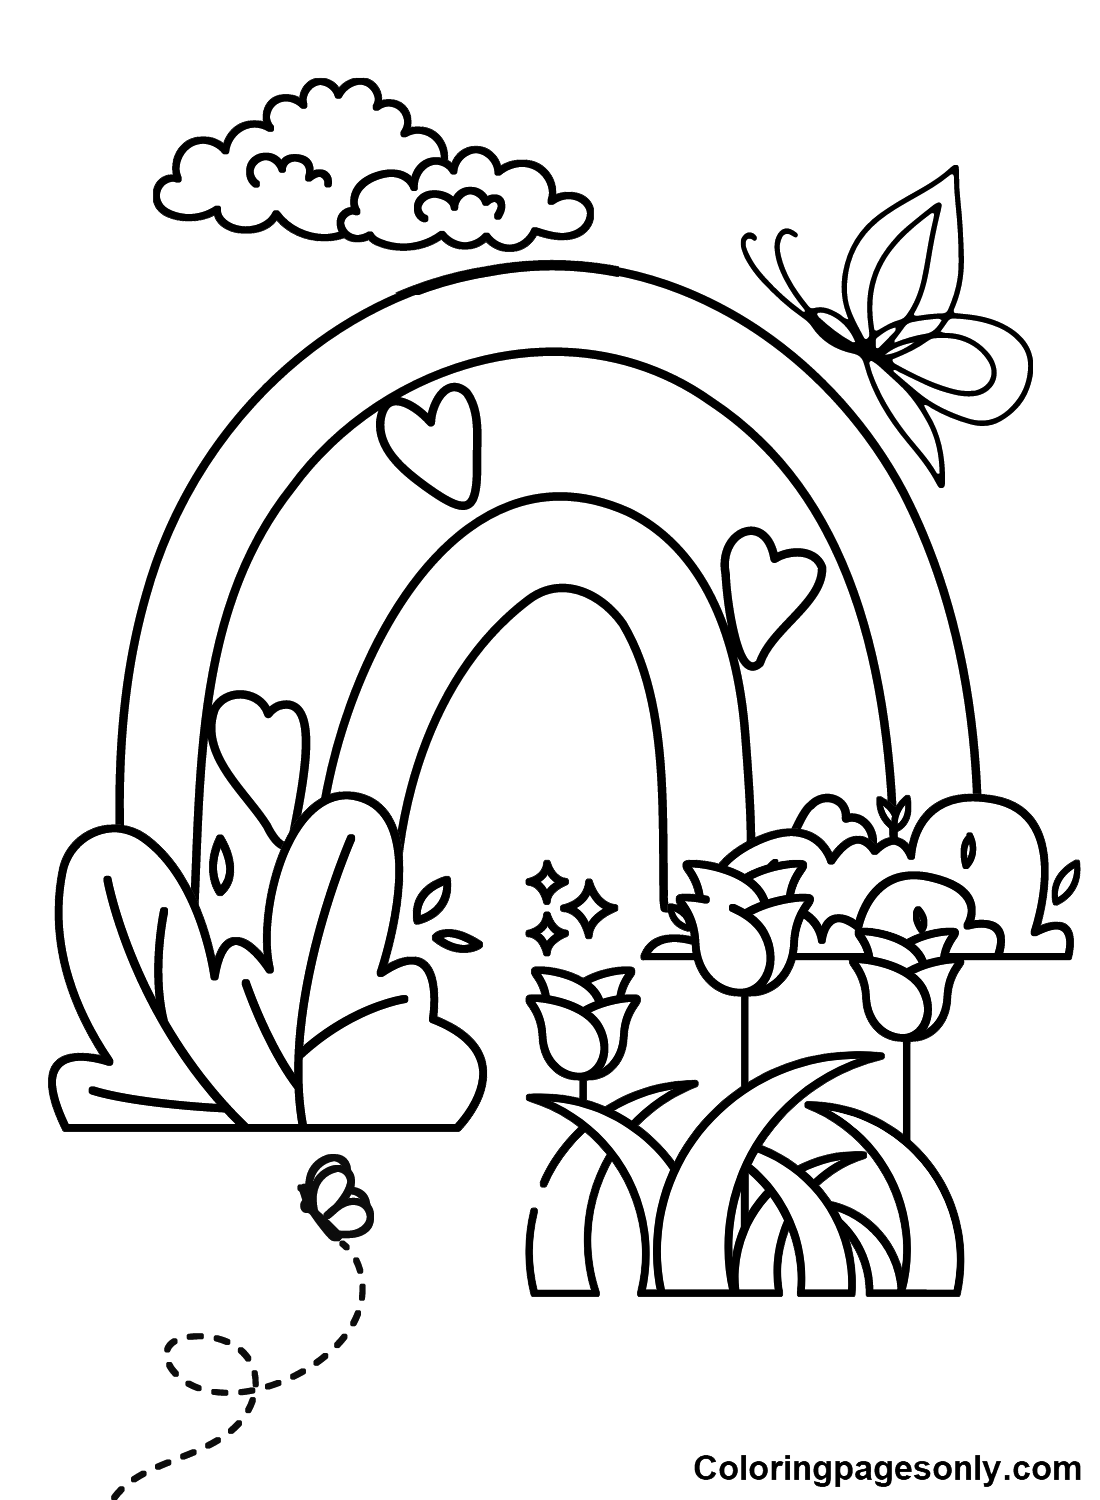 First Day of Spring Images Coloring Pages